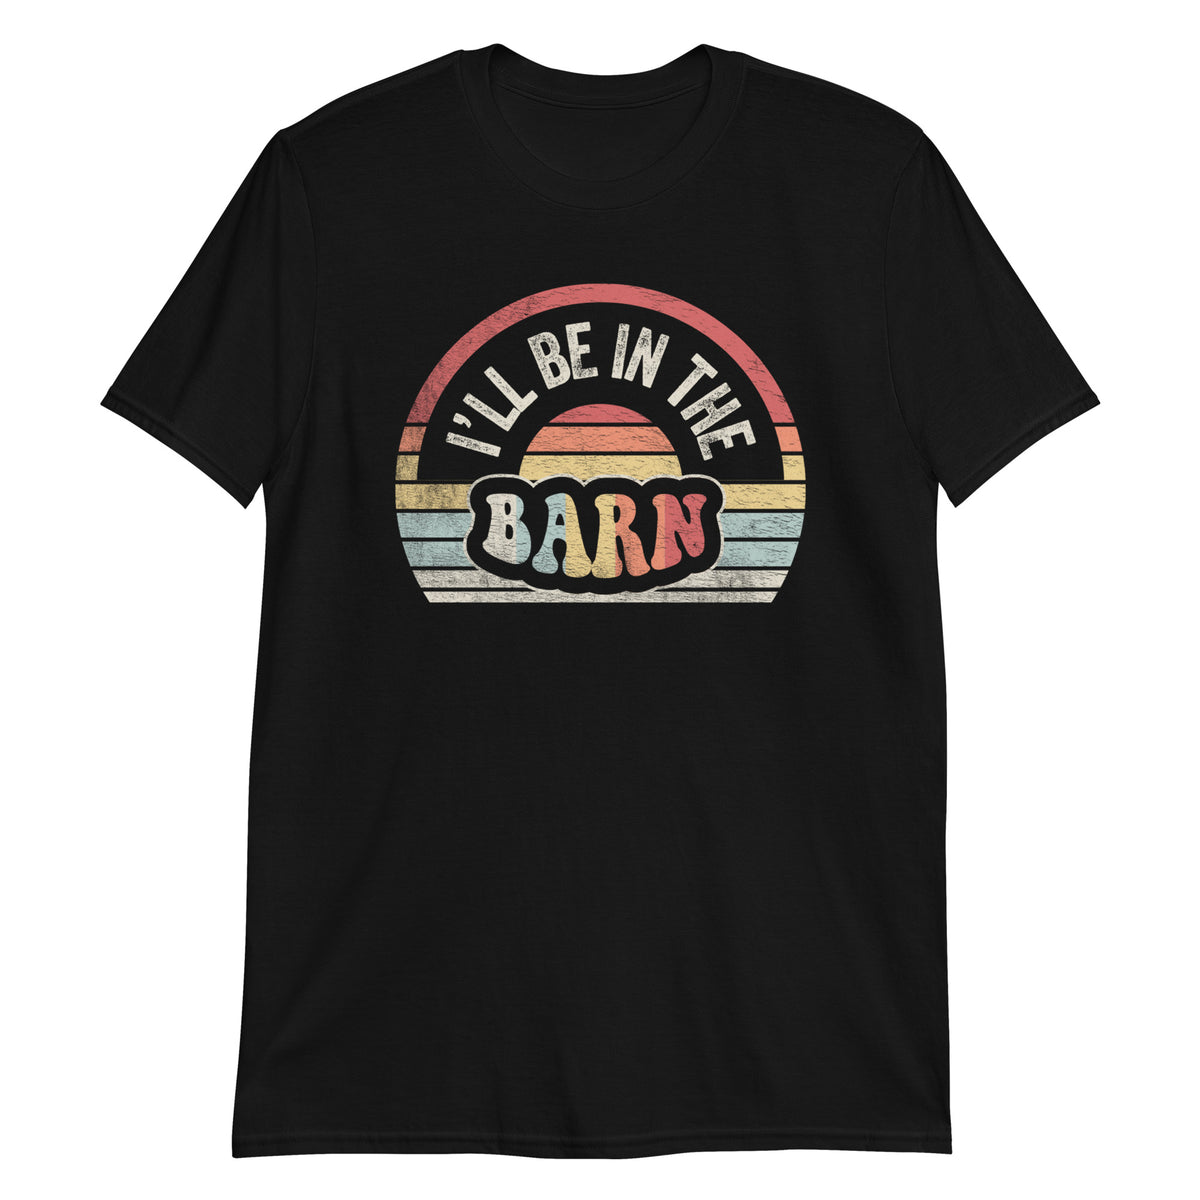 I'll Be In The Barn T-Shirt